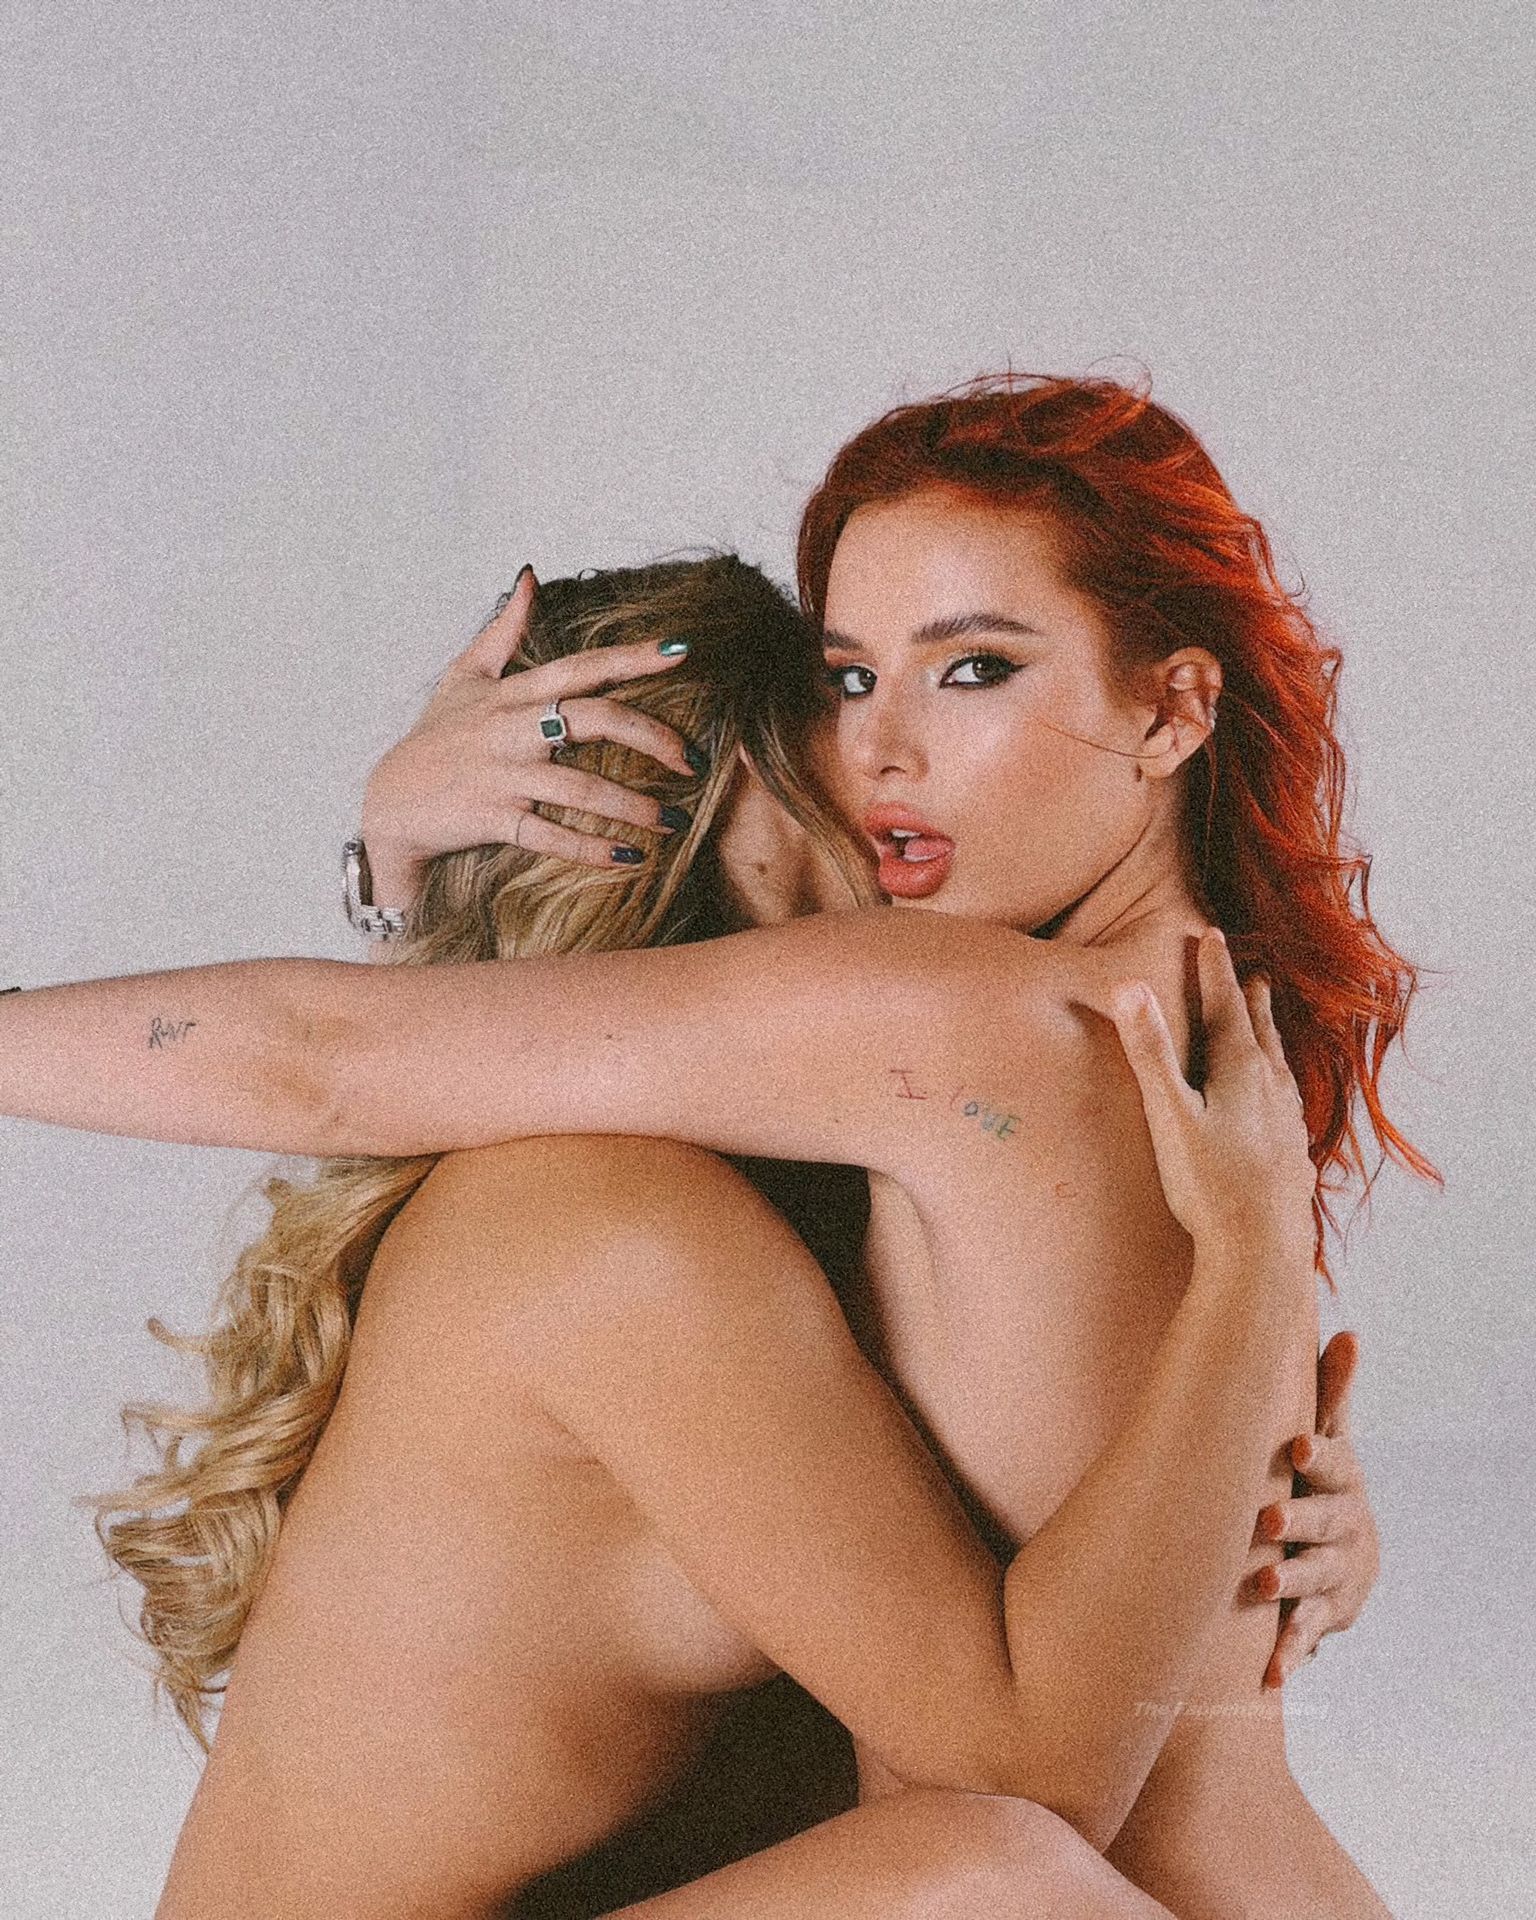 Bella-Thorne-Topless-with-Girlfriend-11-thefappeningblog.com_.jpg